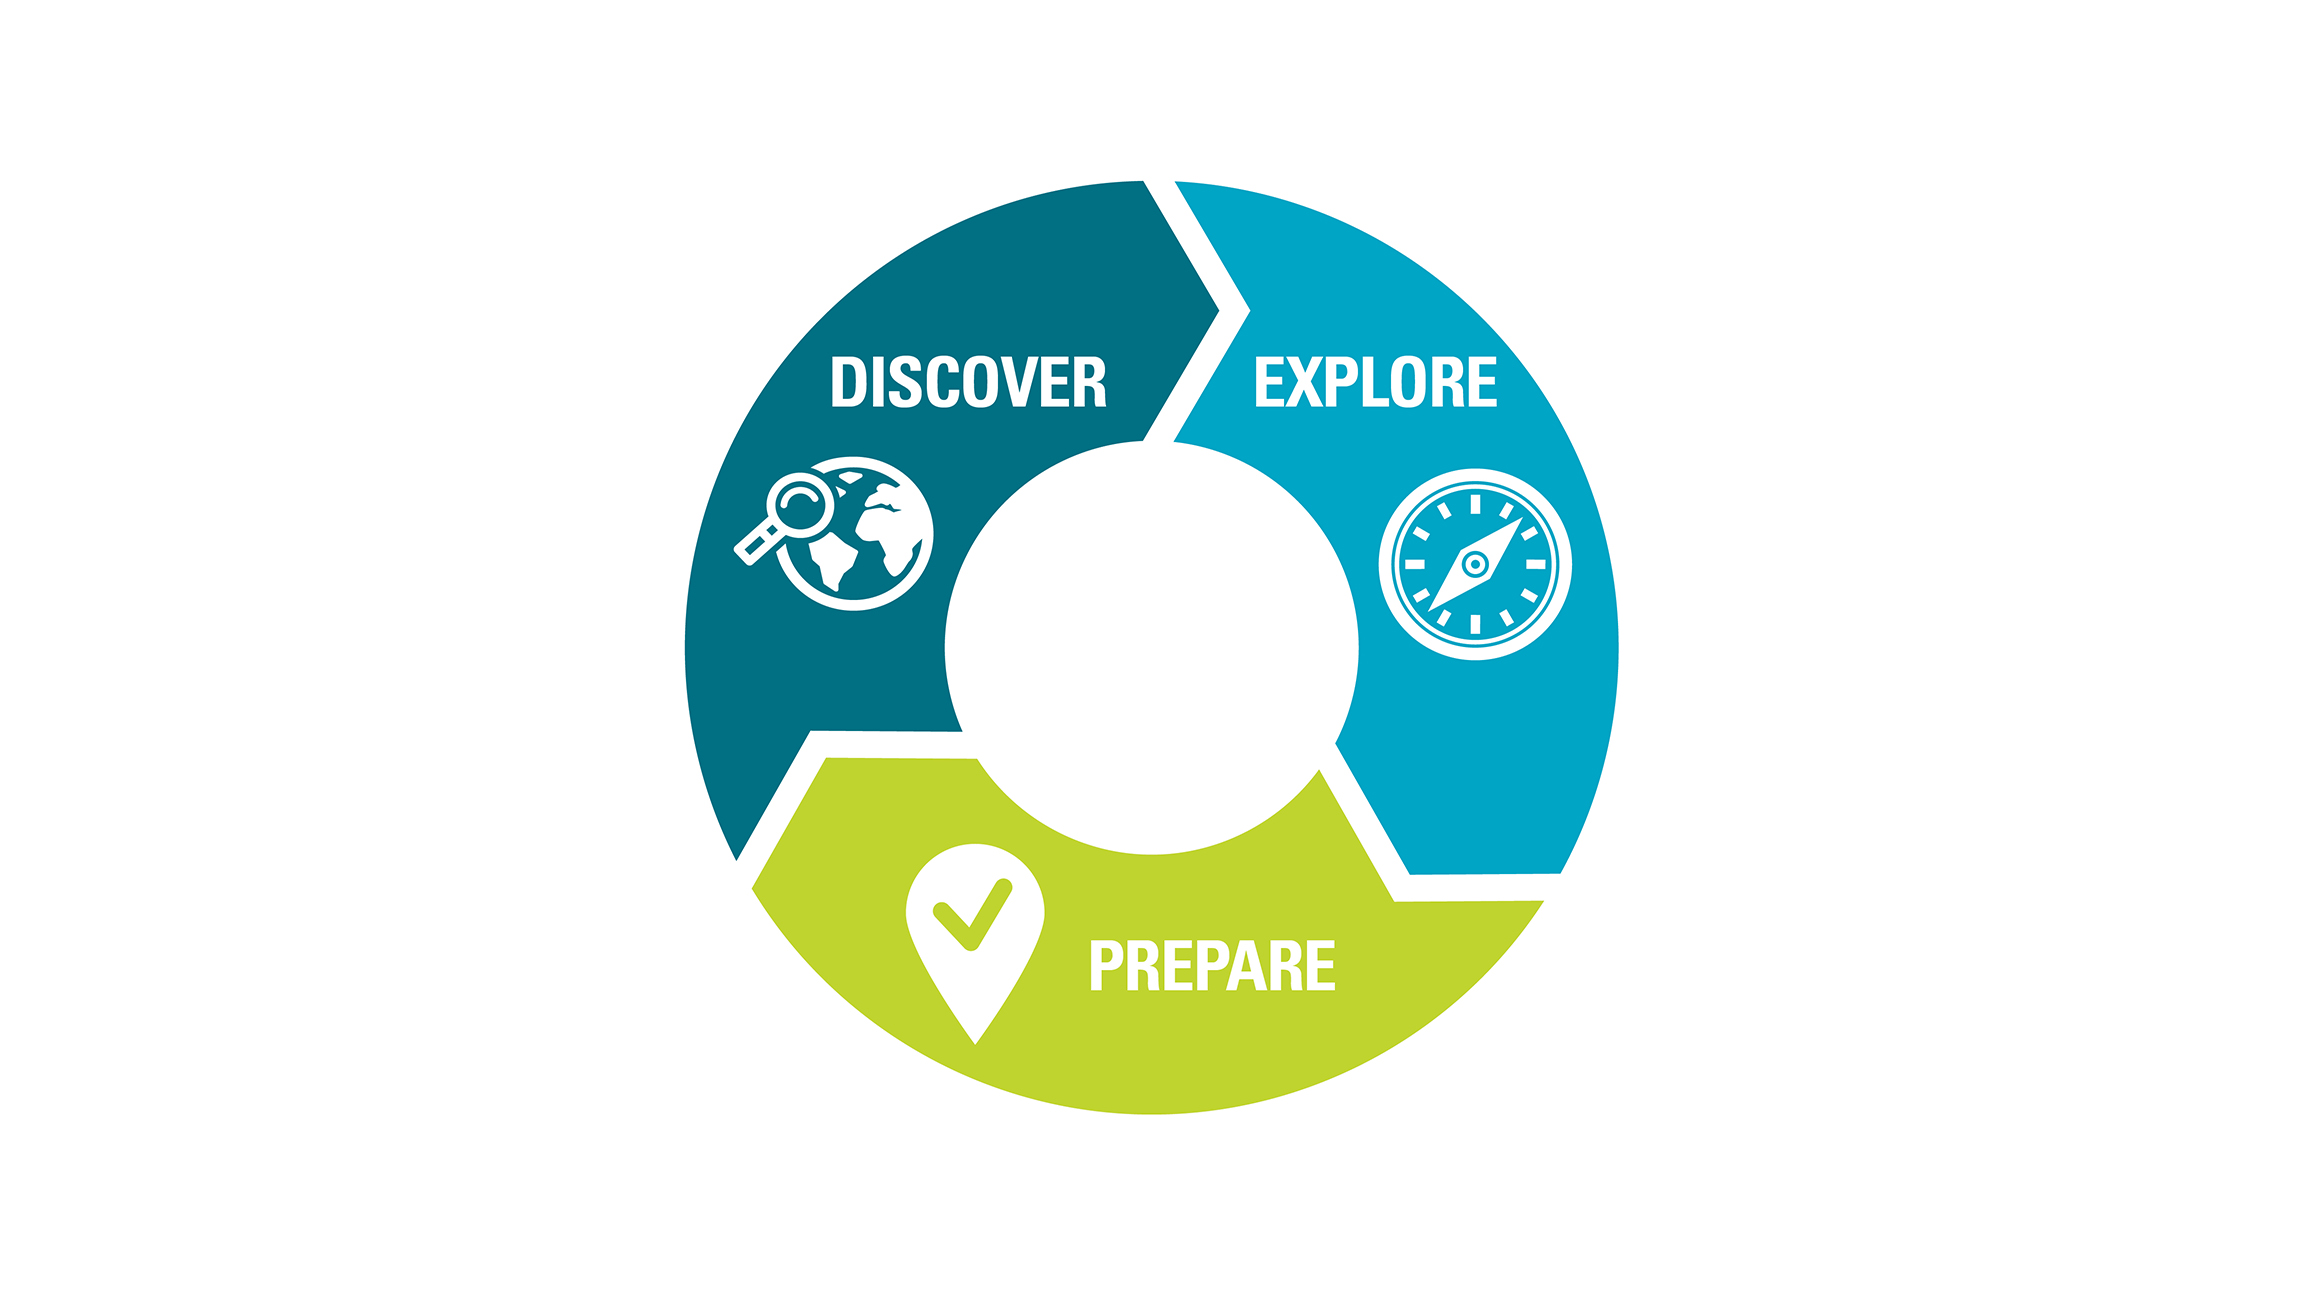 A circle graphic that shows how discovery leads to exploration that leads to preparation that leads back to disccover.